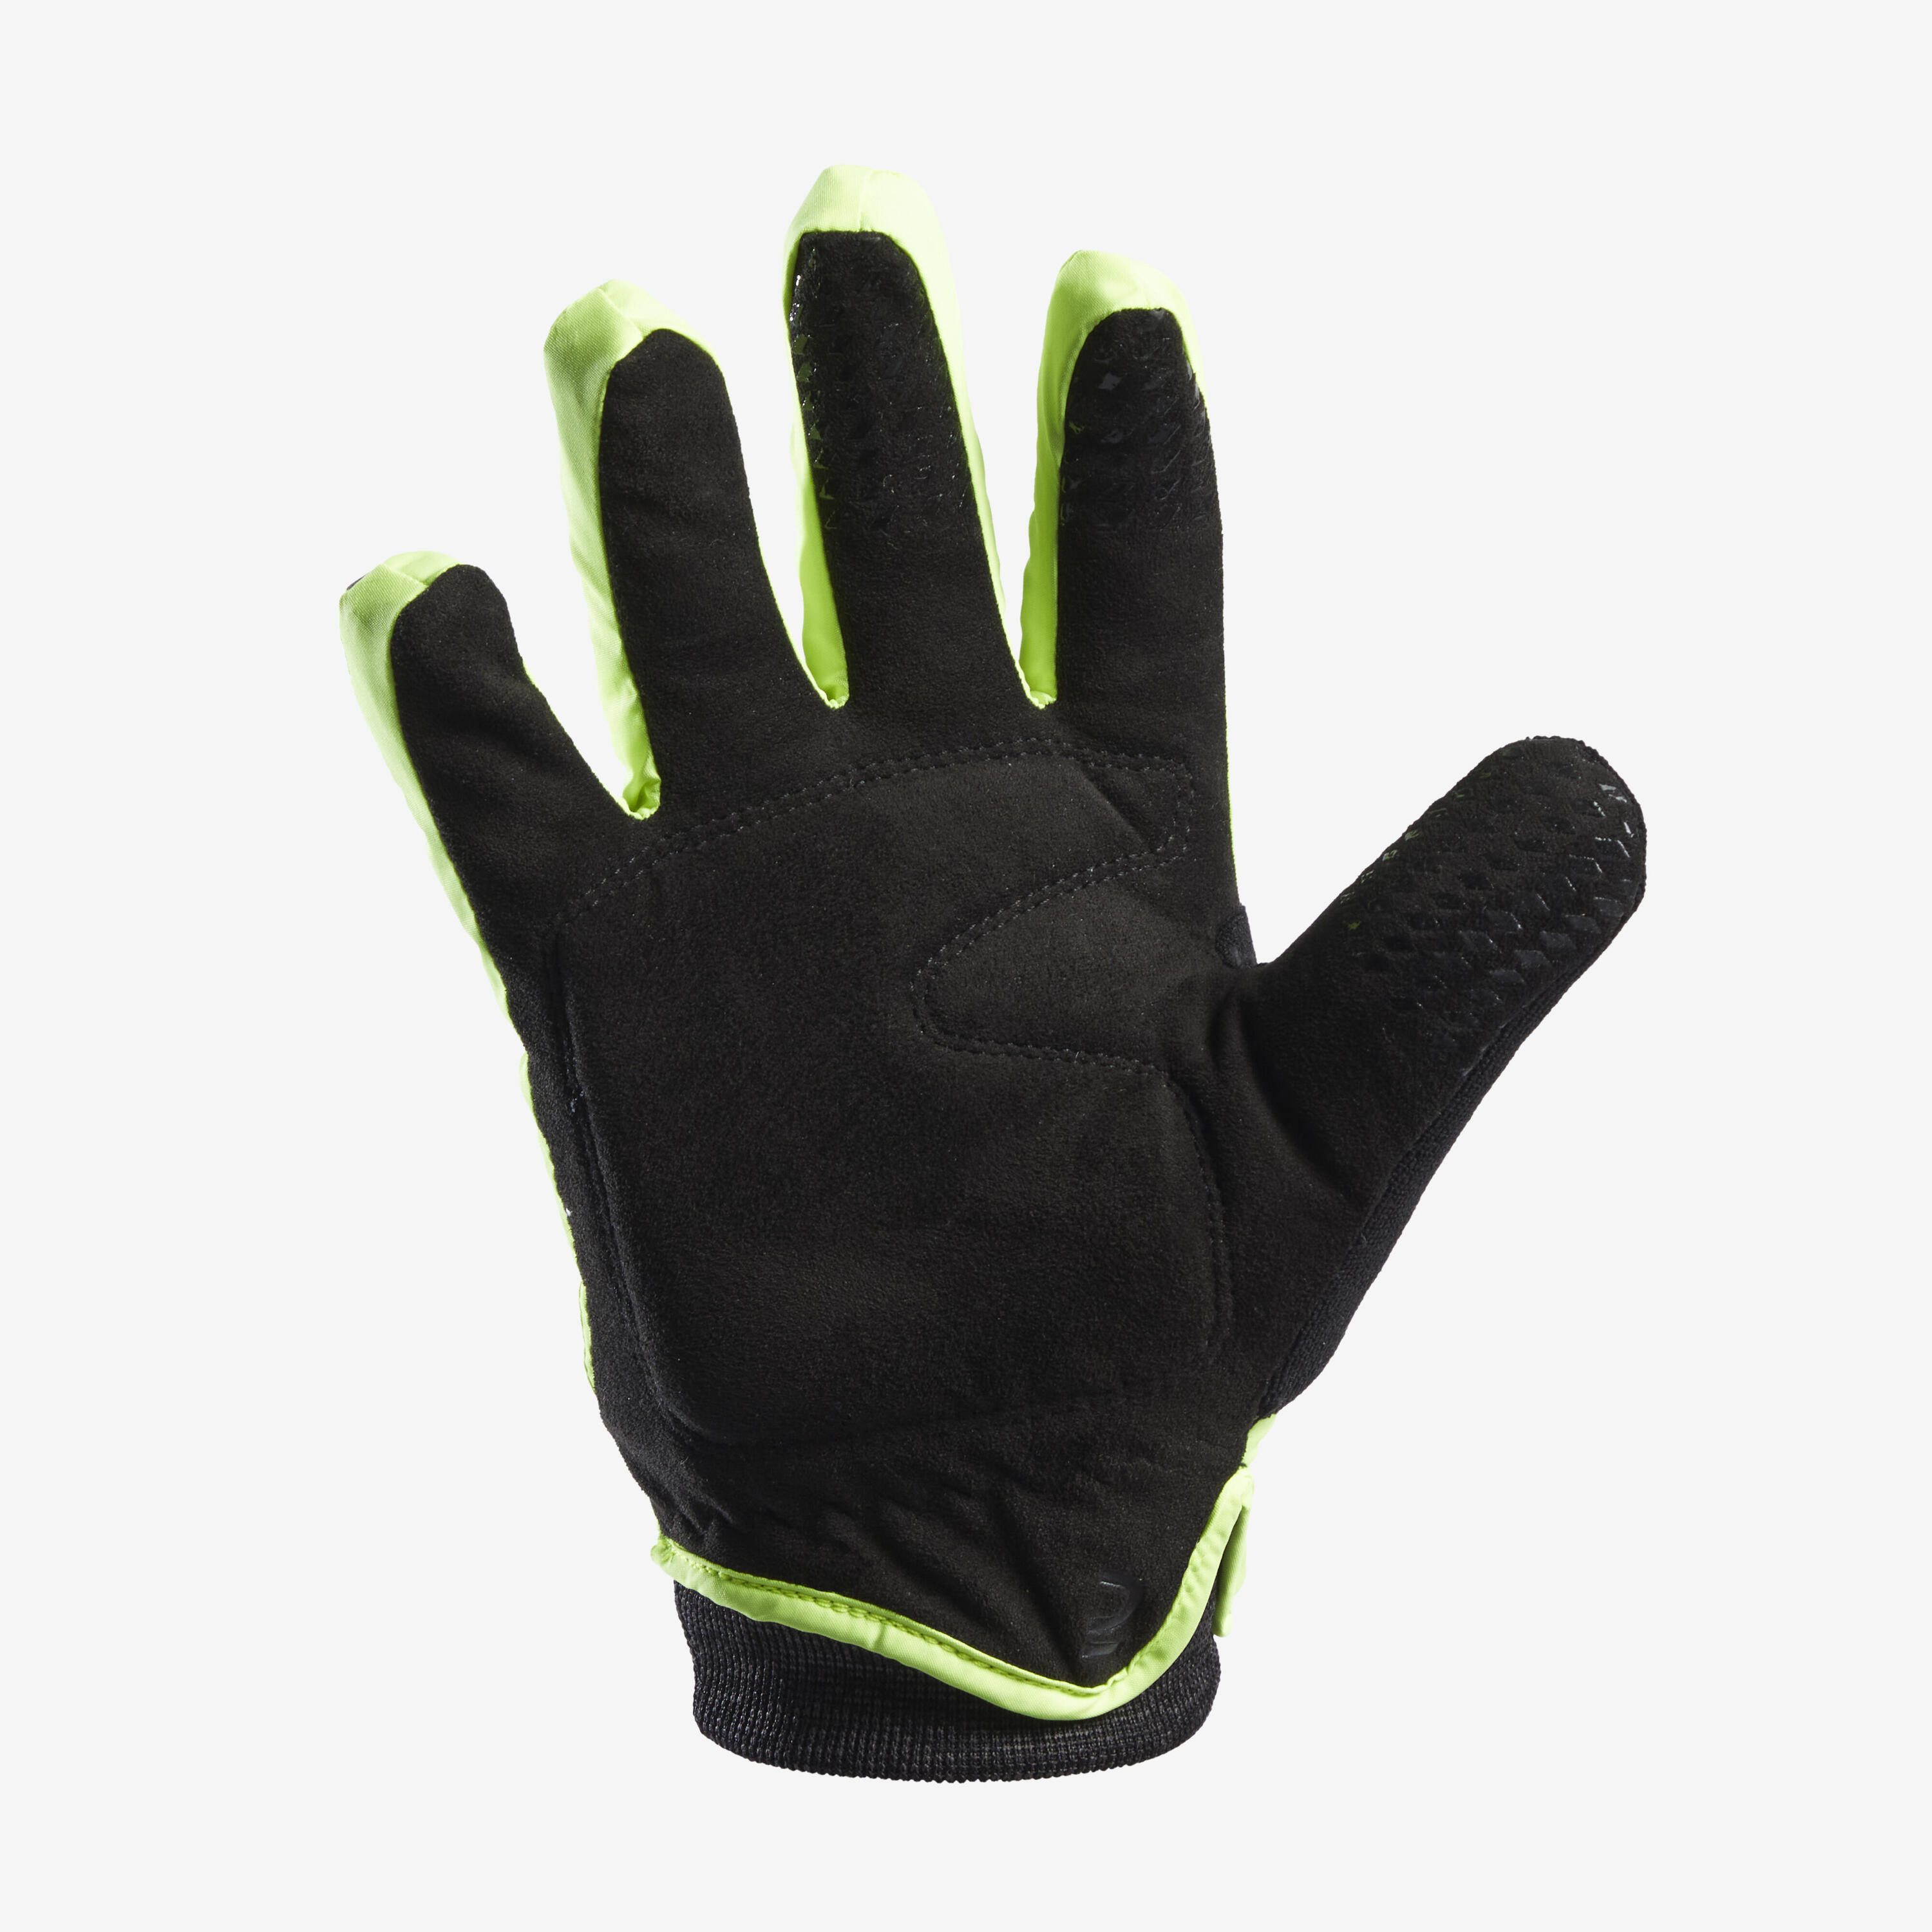 Kids' Winter Cycling Gloves 500 - Neon Yellow 3/5